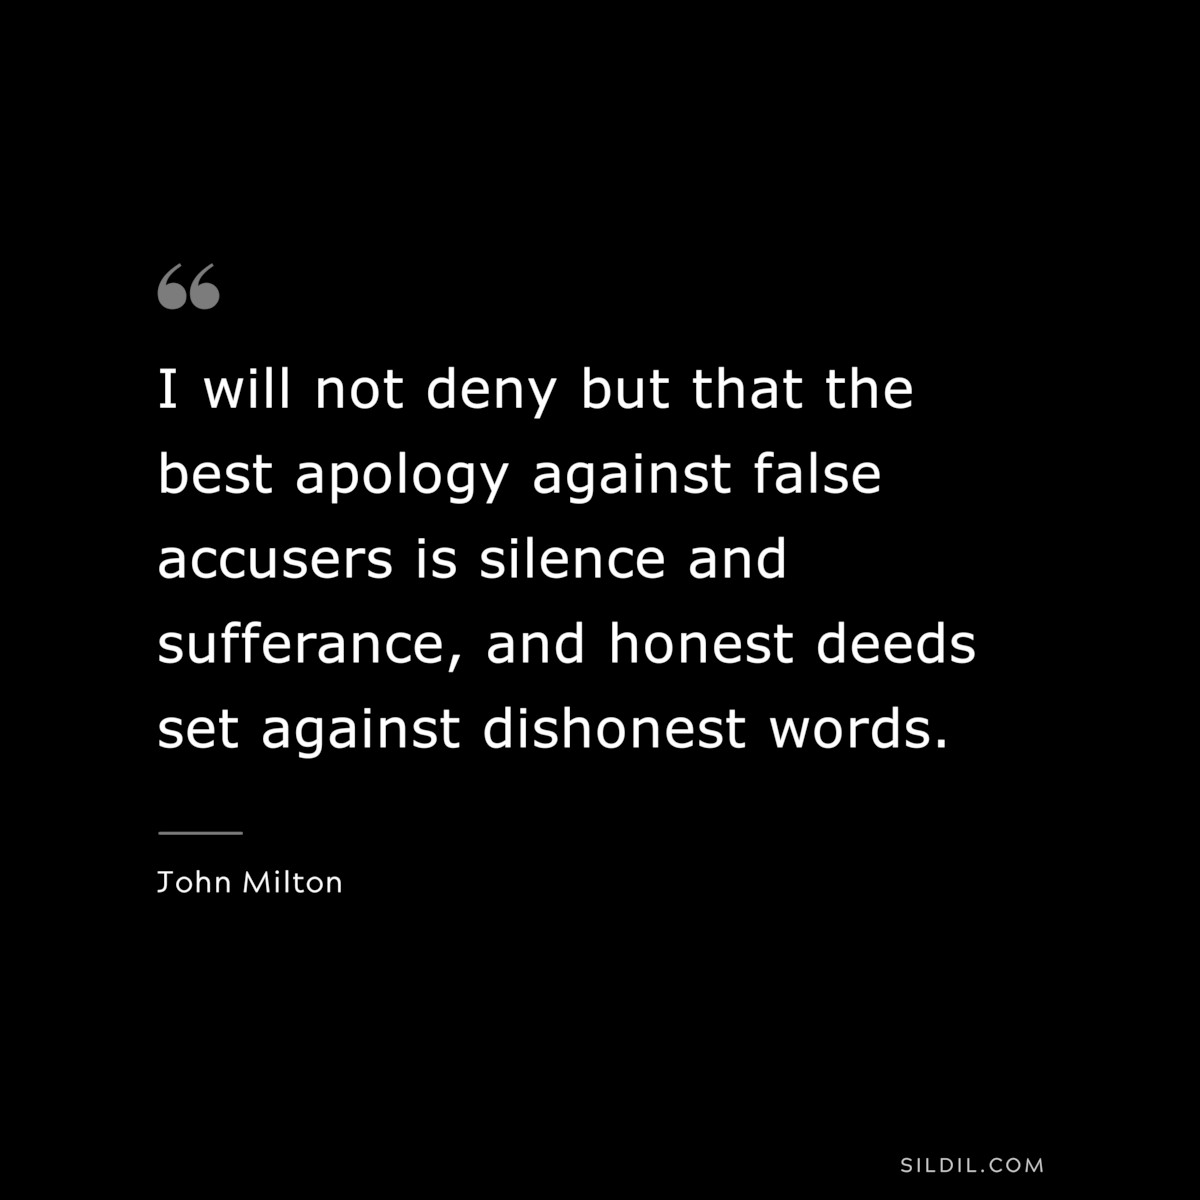 I will not deny but that the best apology against false accusers is silence and sufferance, and honest deeds set against dishonest words. ― John Milton